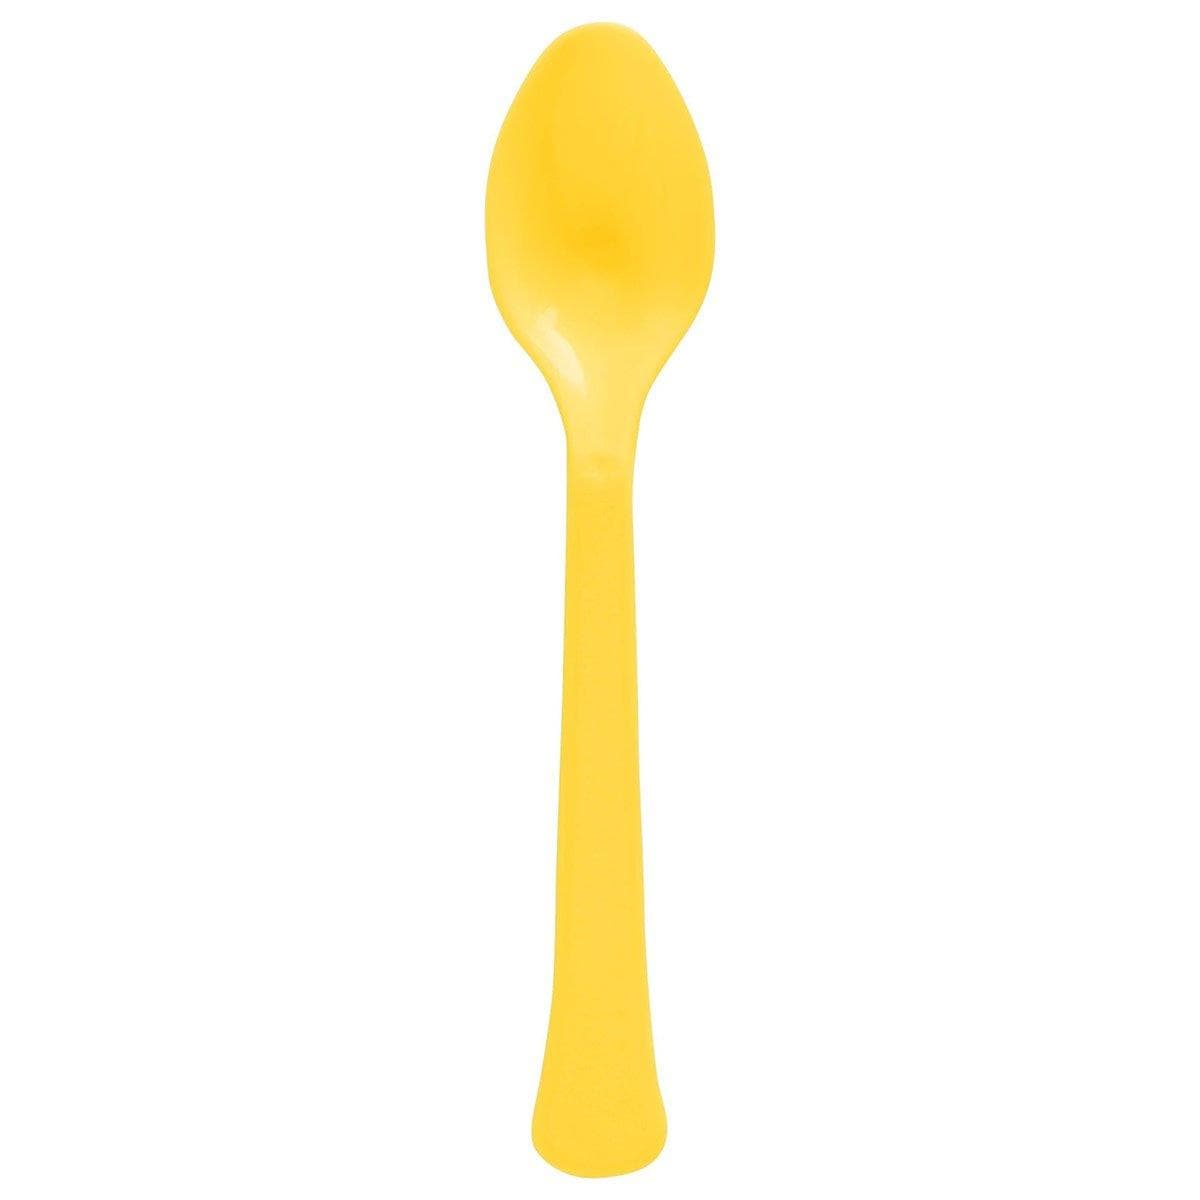 Buy Plasticware Yellow Sunshine Plastic Spoons, 20 Count sold at Party Expert